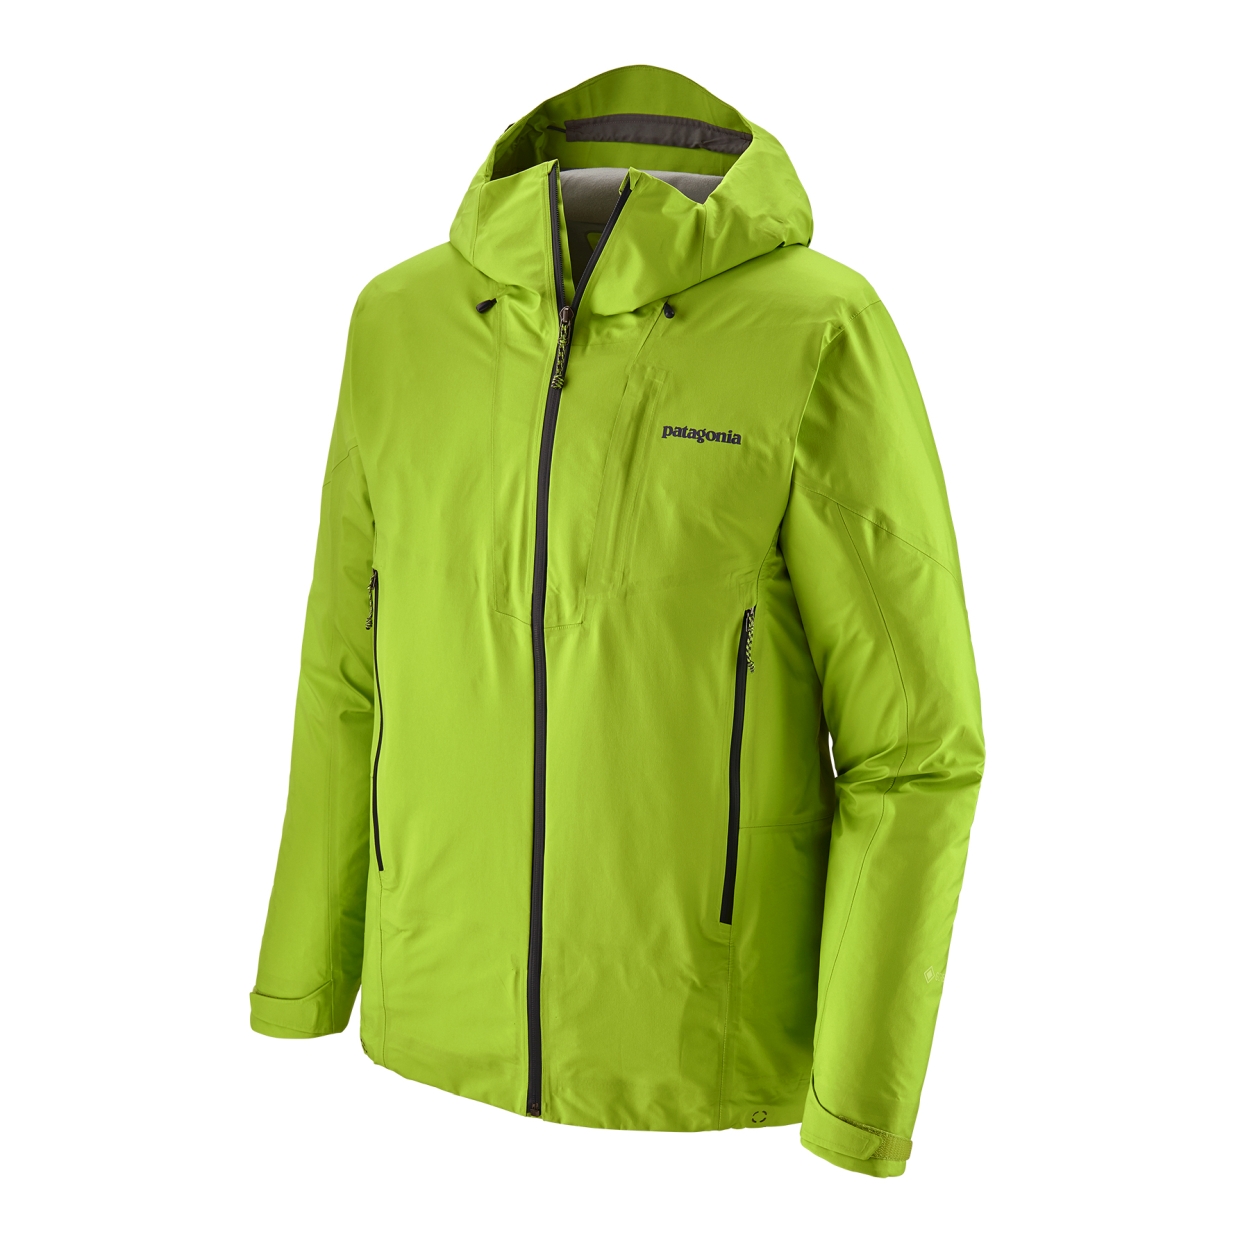 M's Ascensionist Jacket, peppergrass green